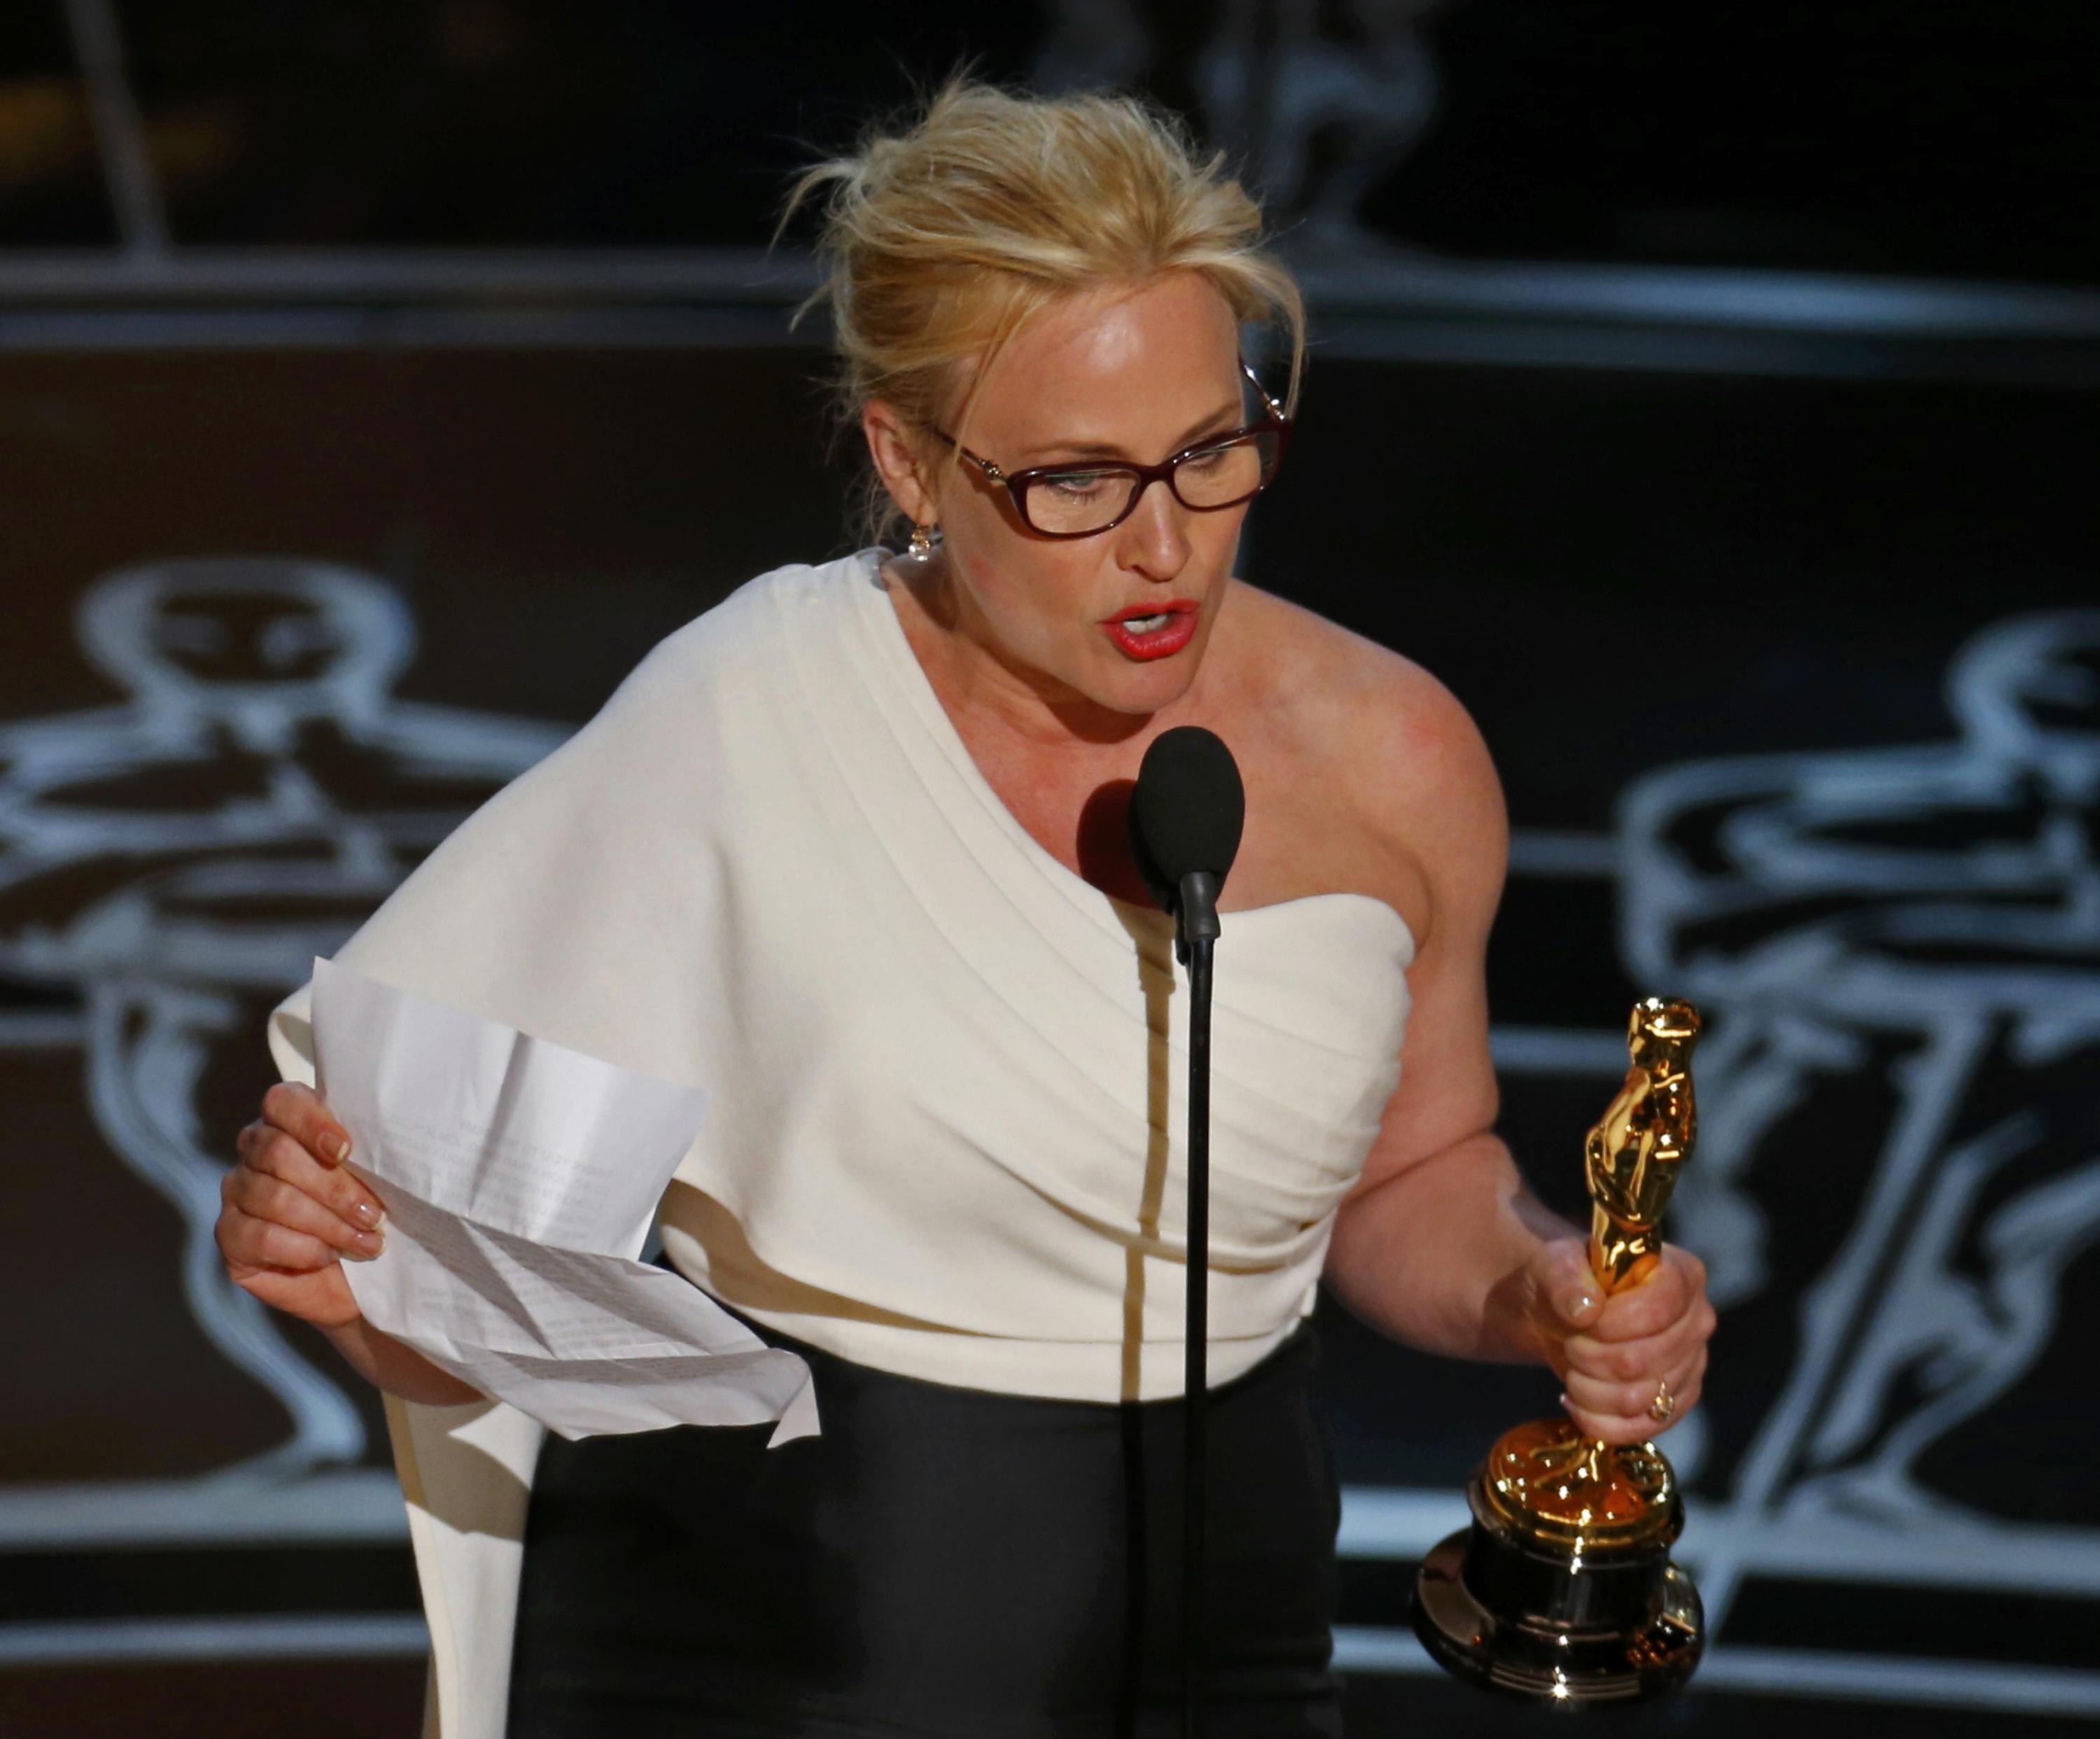 Patricia Arquette speaks after winning the Oscar for Best Supporting Actress for her role in Boyhood.  Photograph: Mike Blake/Reuters/Aflo 